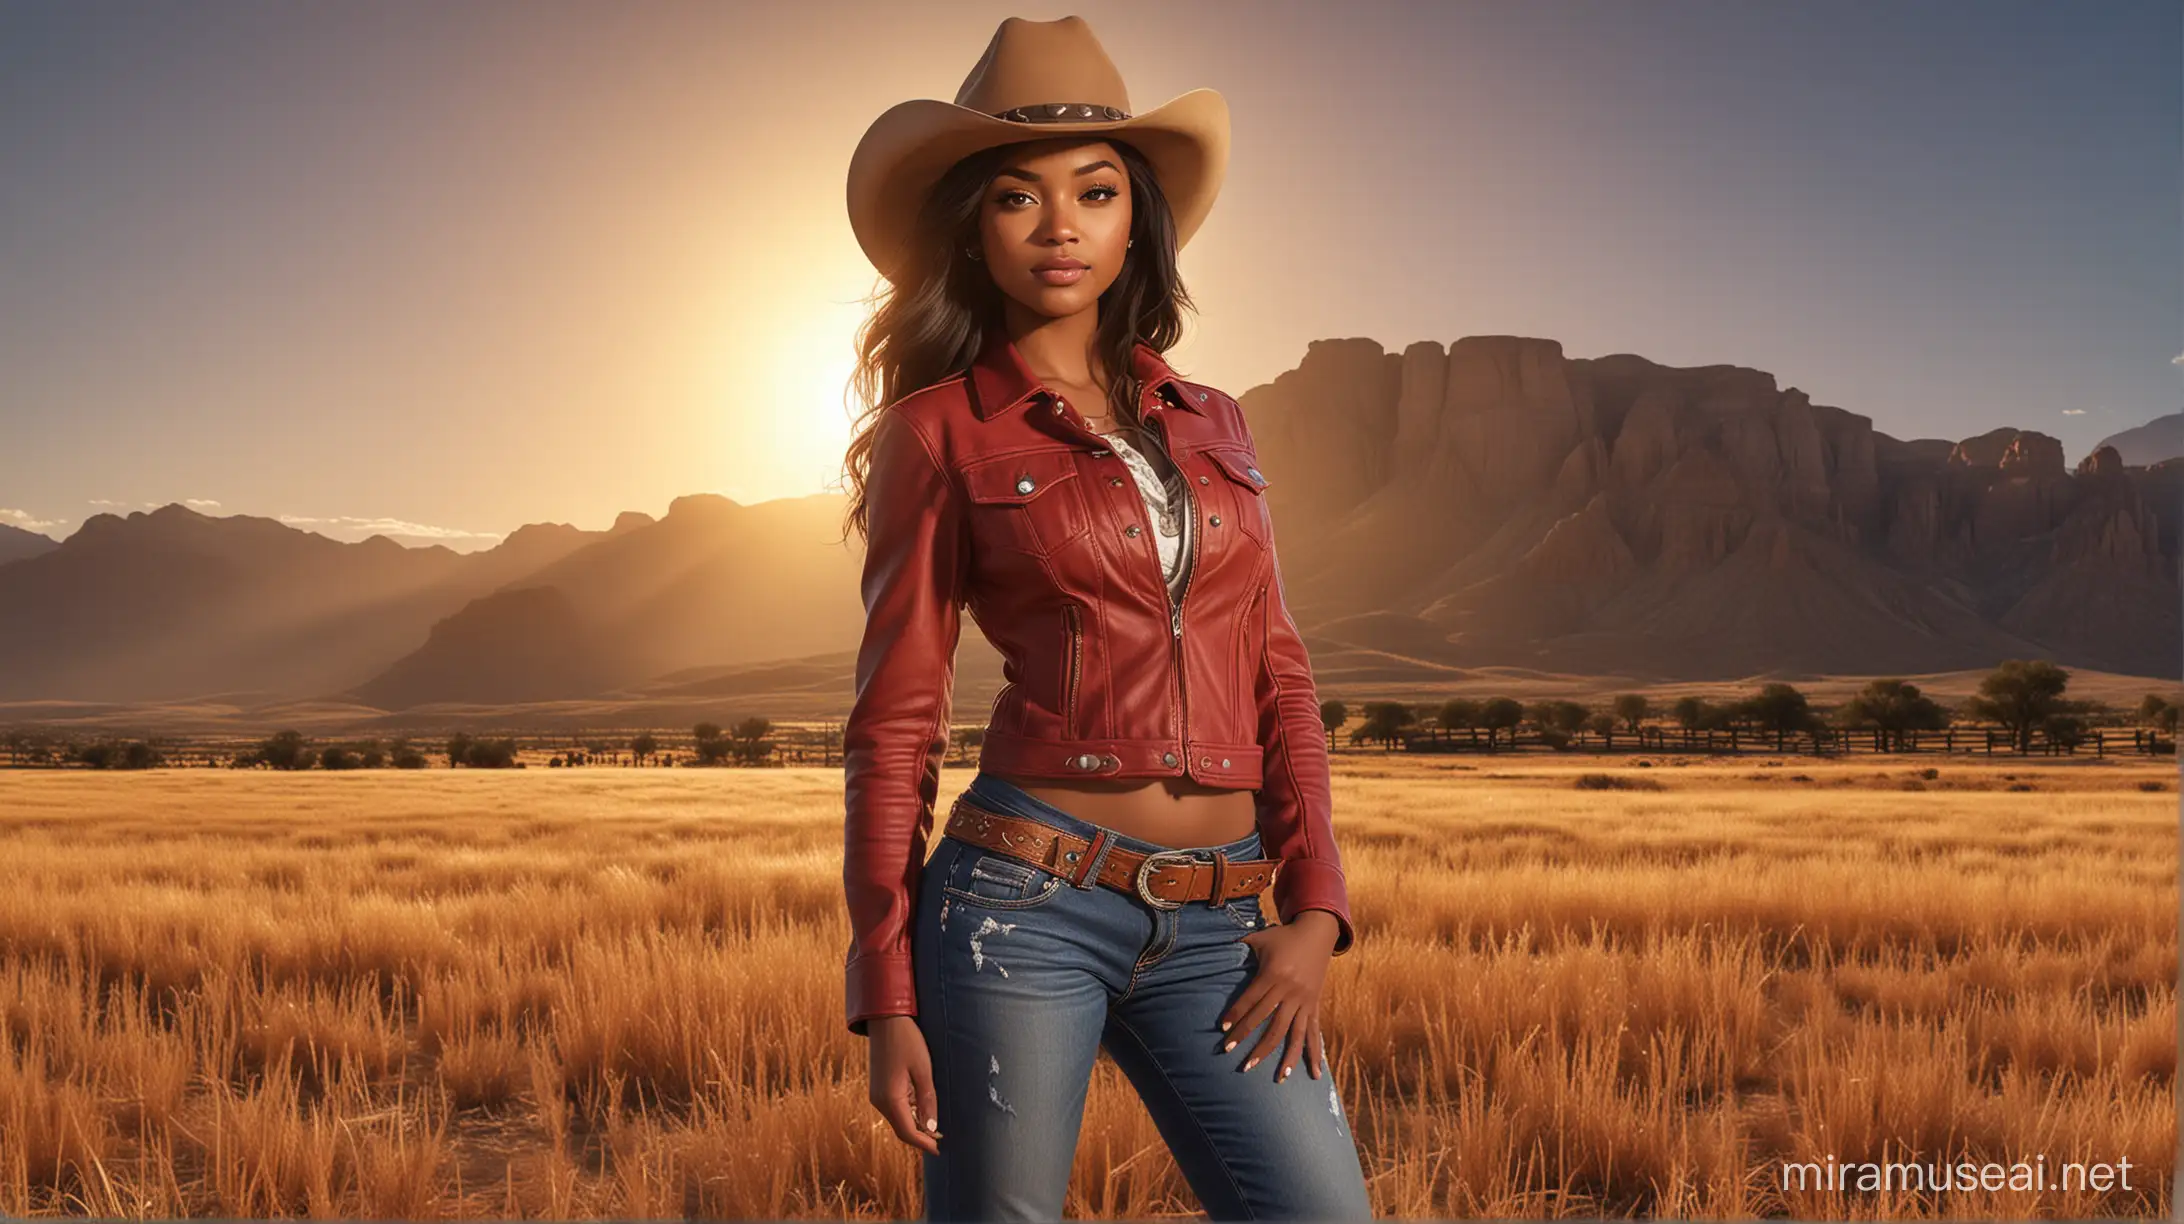 Confident African American Cowgirl at Sunset HyperRealistic Chibi Style Portrait